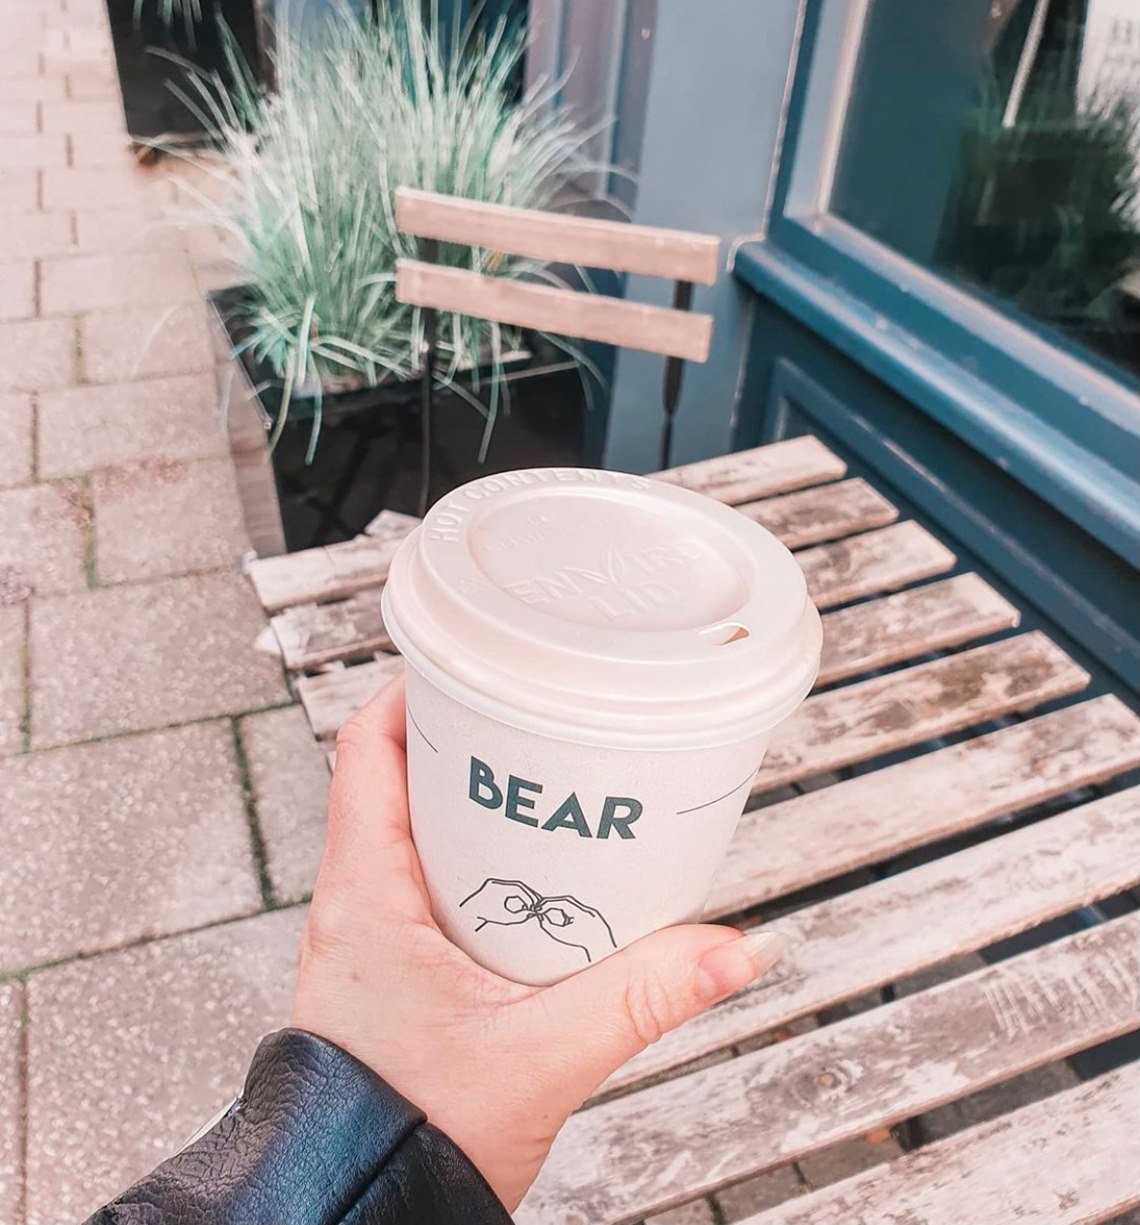 BEAR in Barons Quay will be opening its outdoor space on April 12.